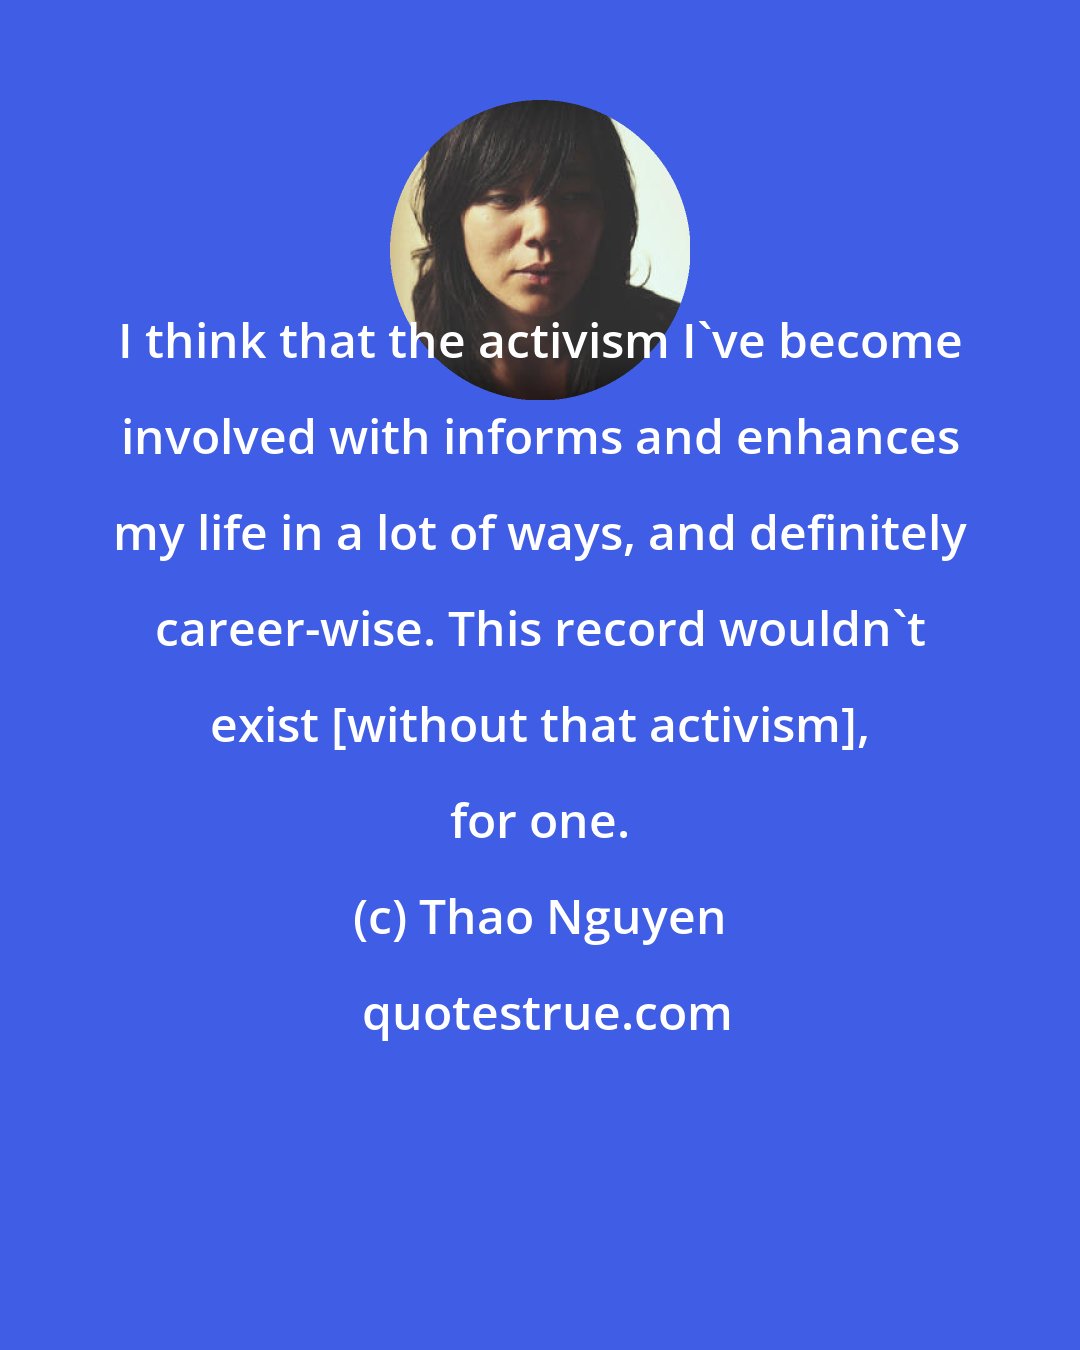 Thao Nguyen: I think that the activism I've become involved with informs and enhances my life in a lot of ways, and definitely career-wise. This record wouldn't exist [without that activism], for one.